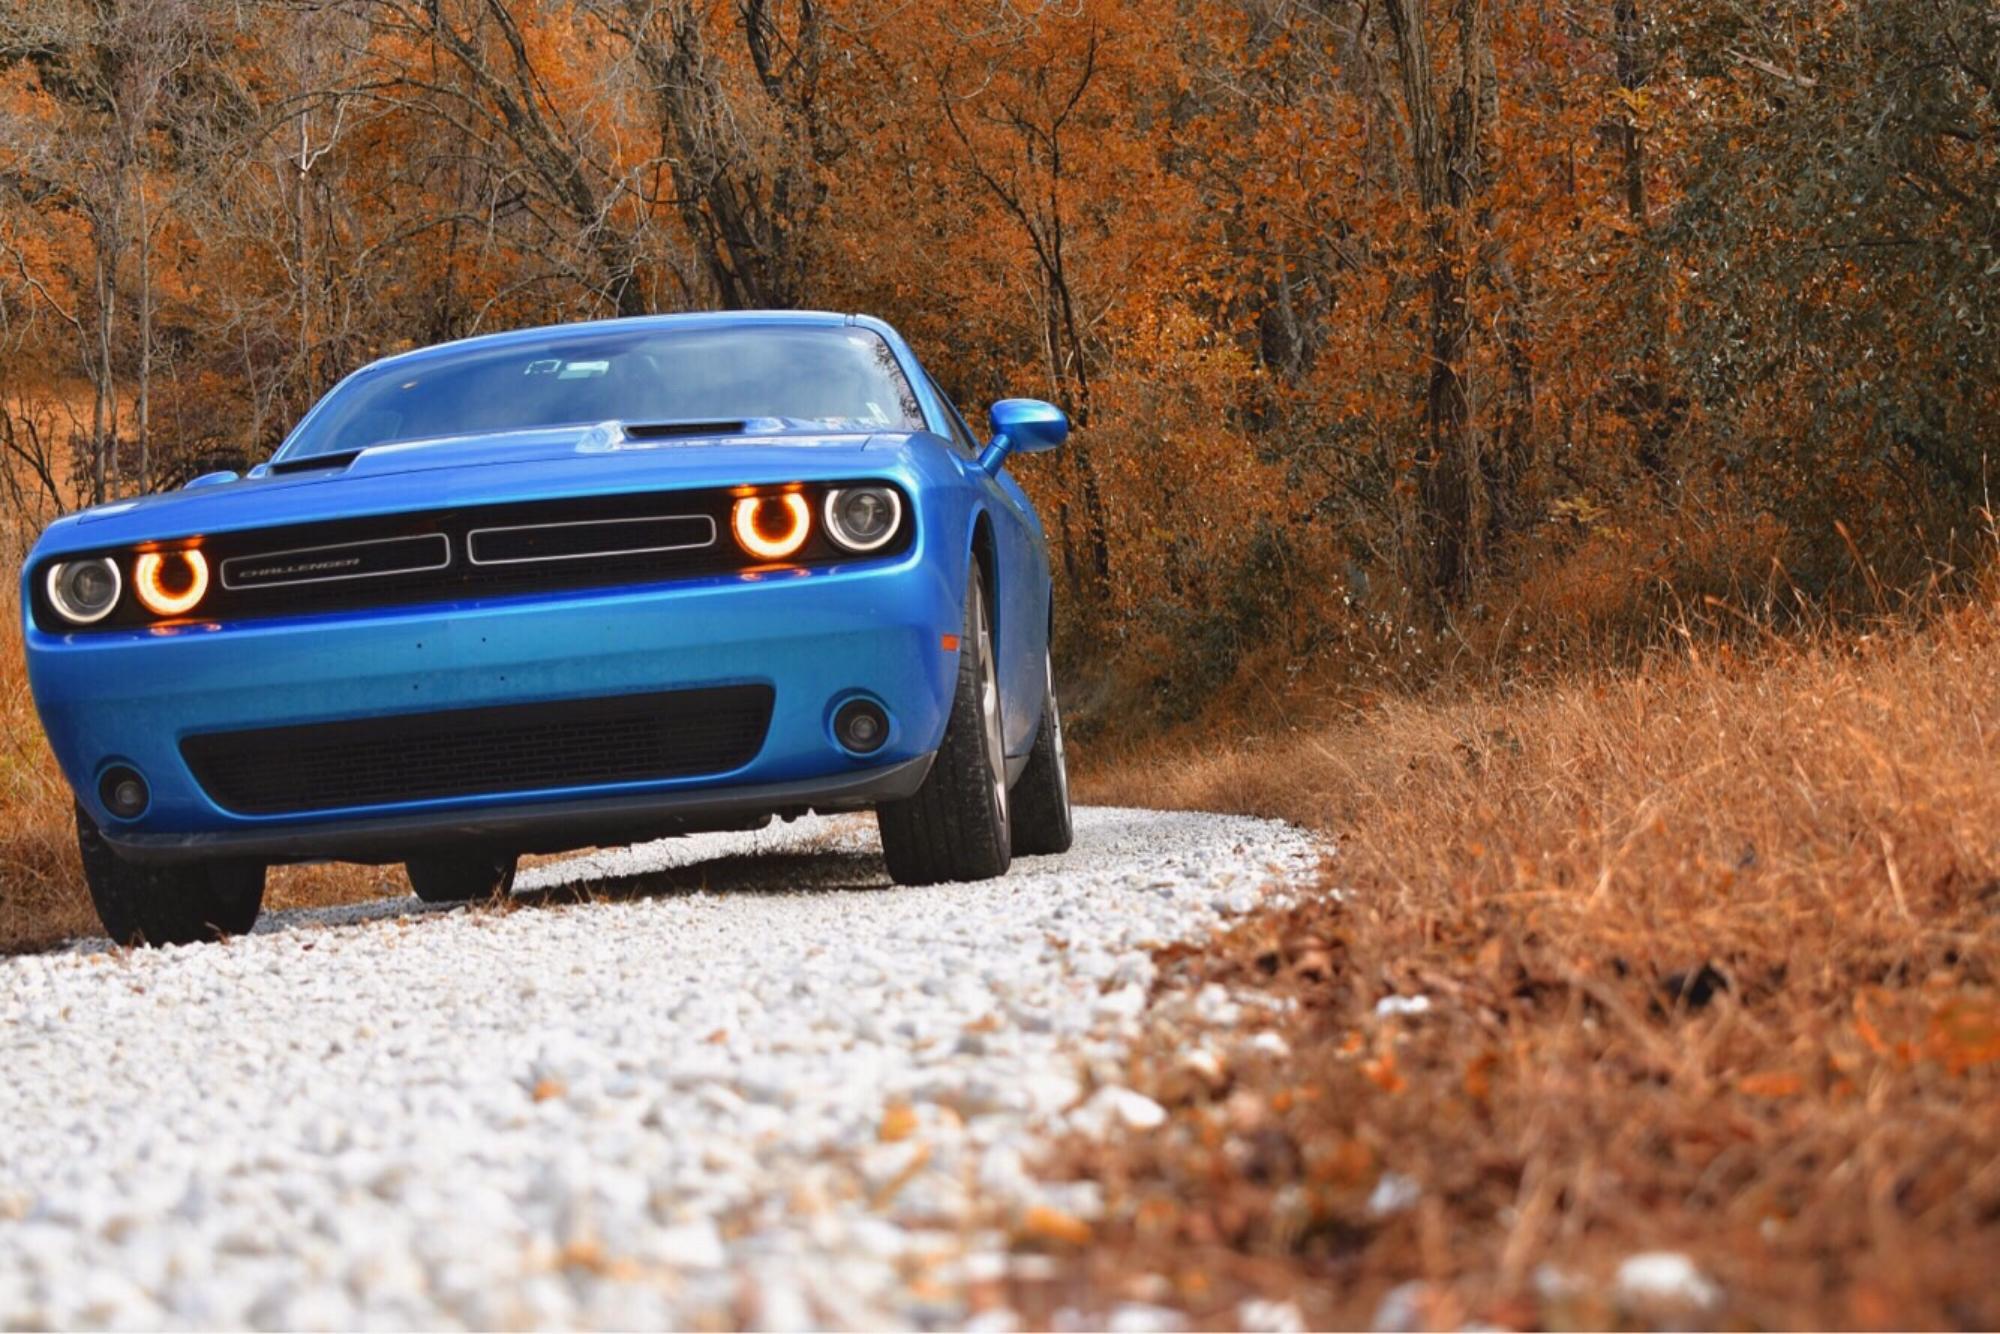 Some say that the Dodge Challenger is the last true muscle car in production.